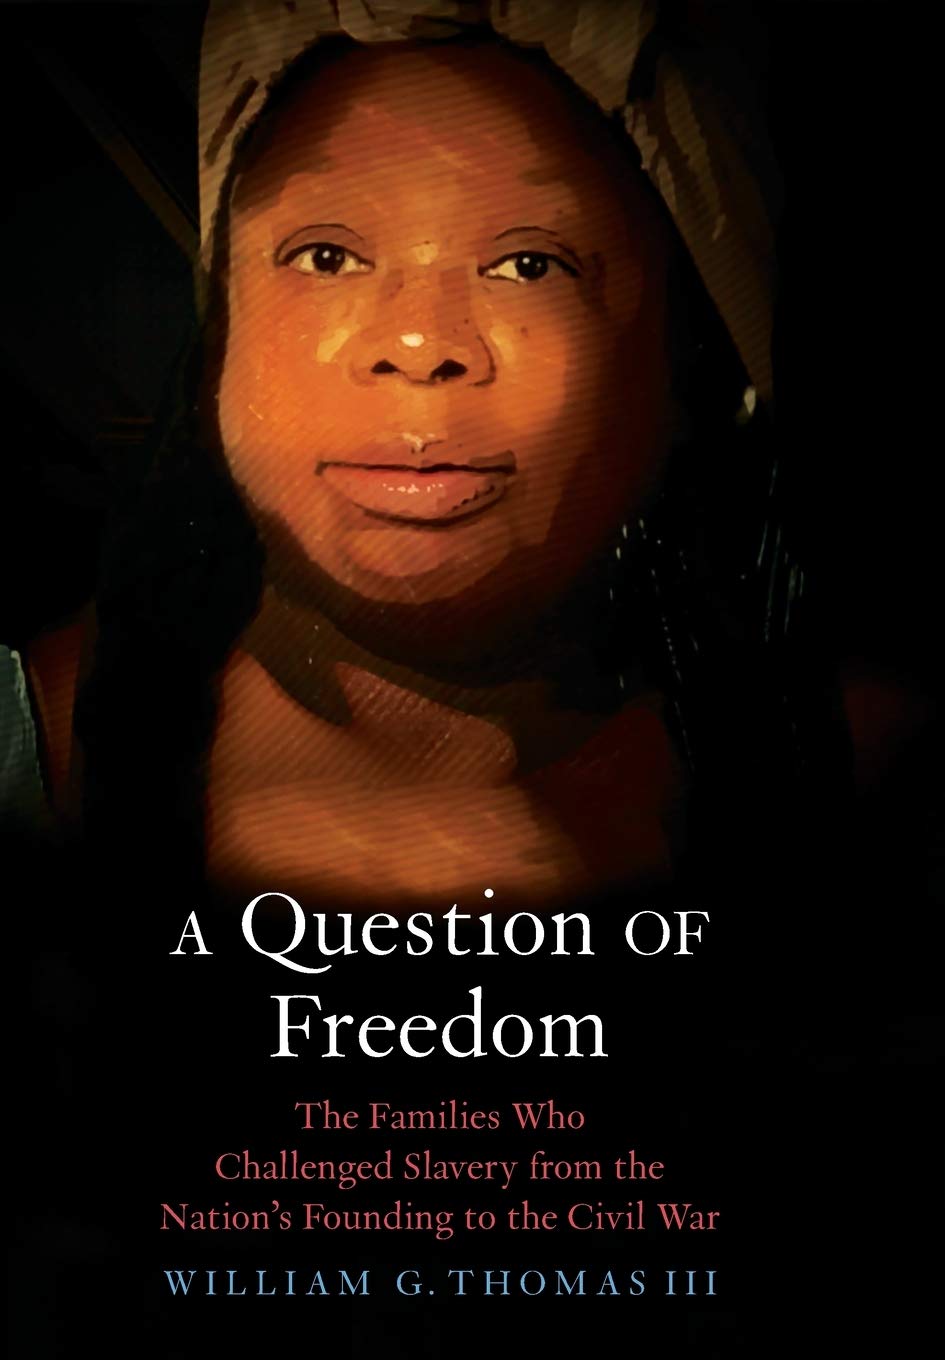 A Question of Freedom